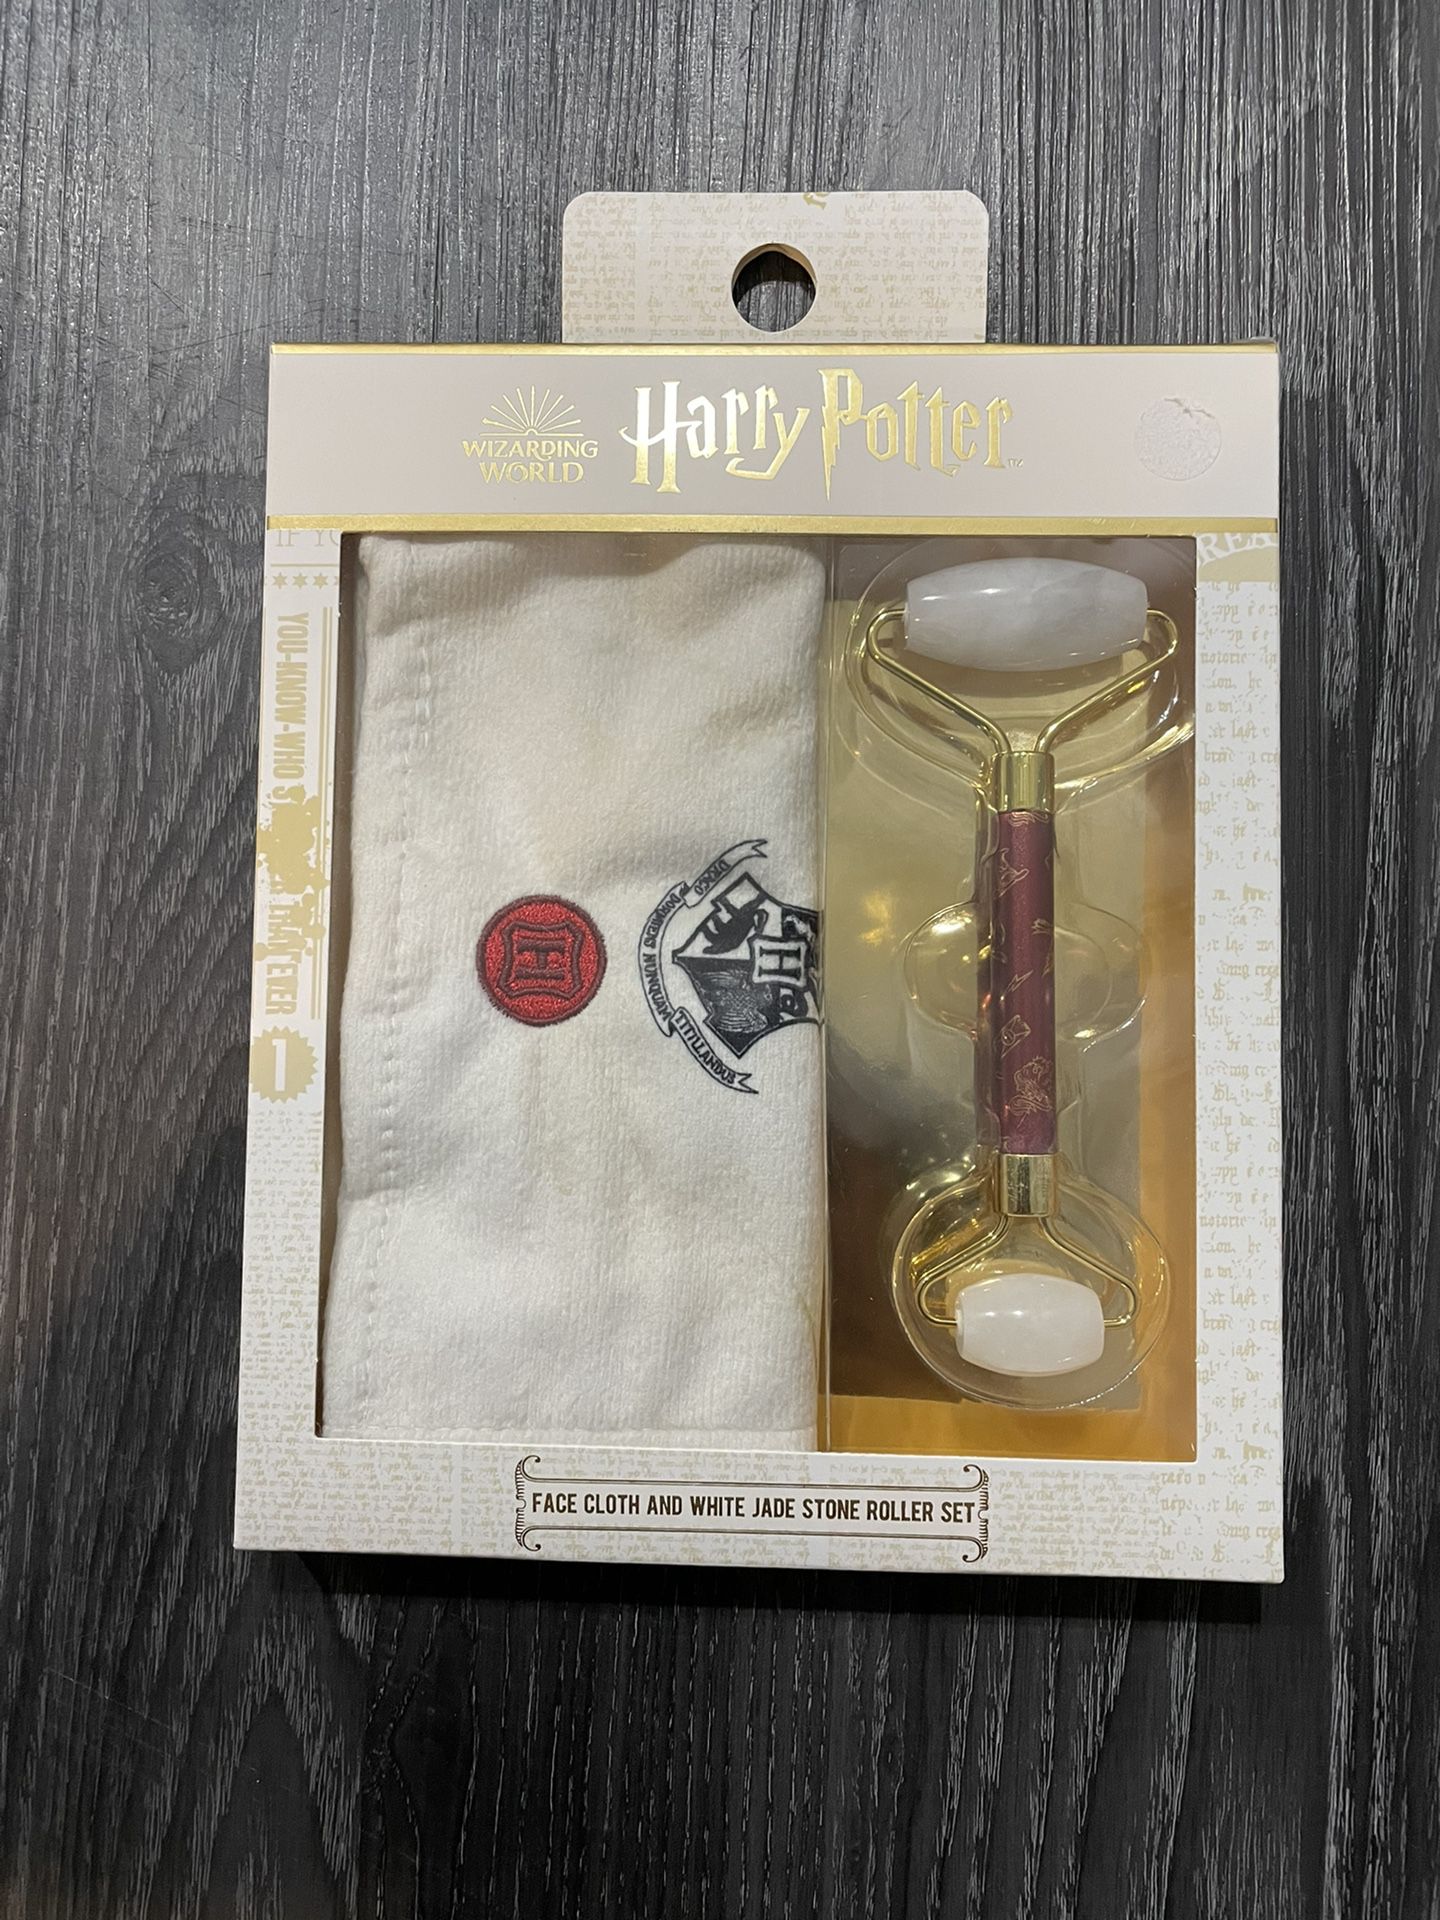 NWT Harry Potter Face Cloth And Facial Stone Roller